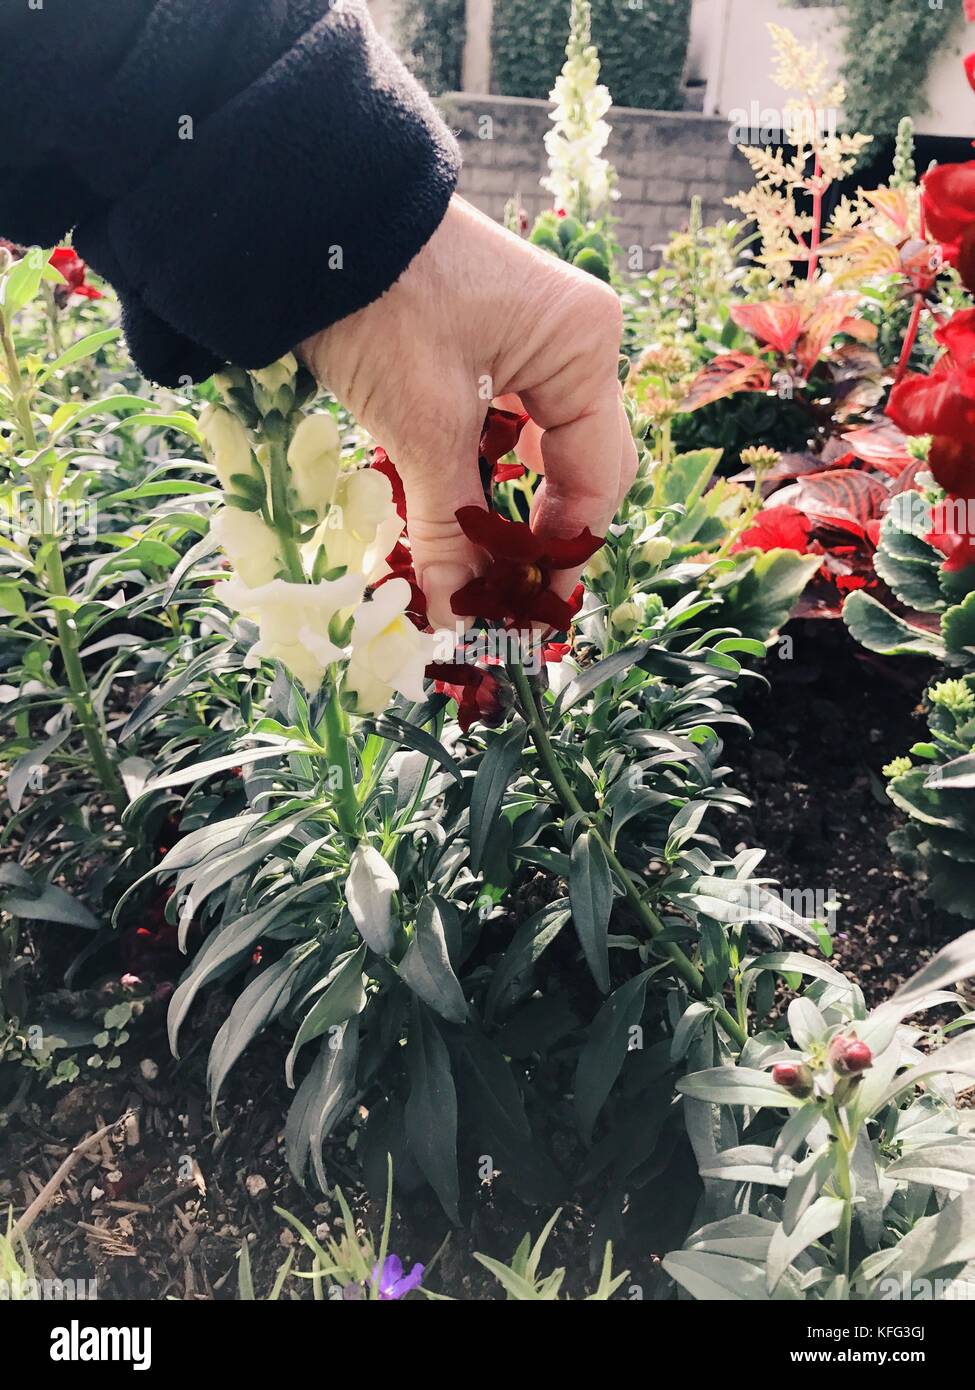 Woman's hand holding snapdragon flower. Stock Photo